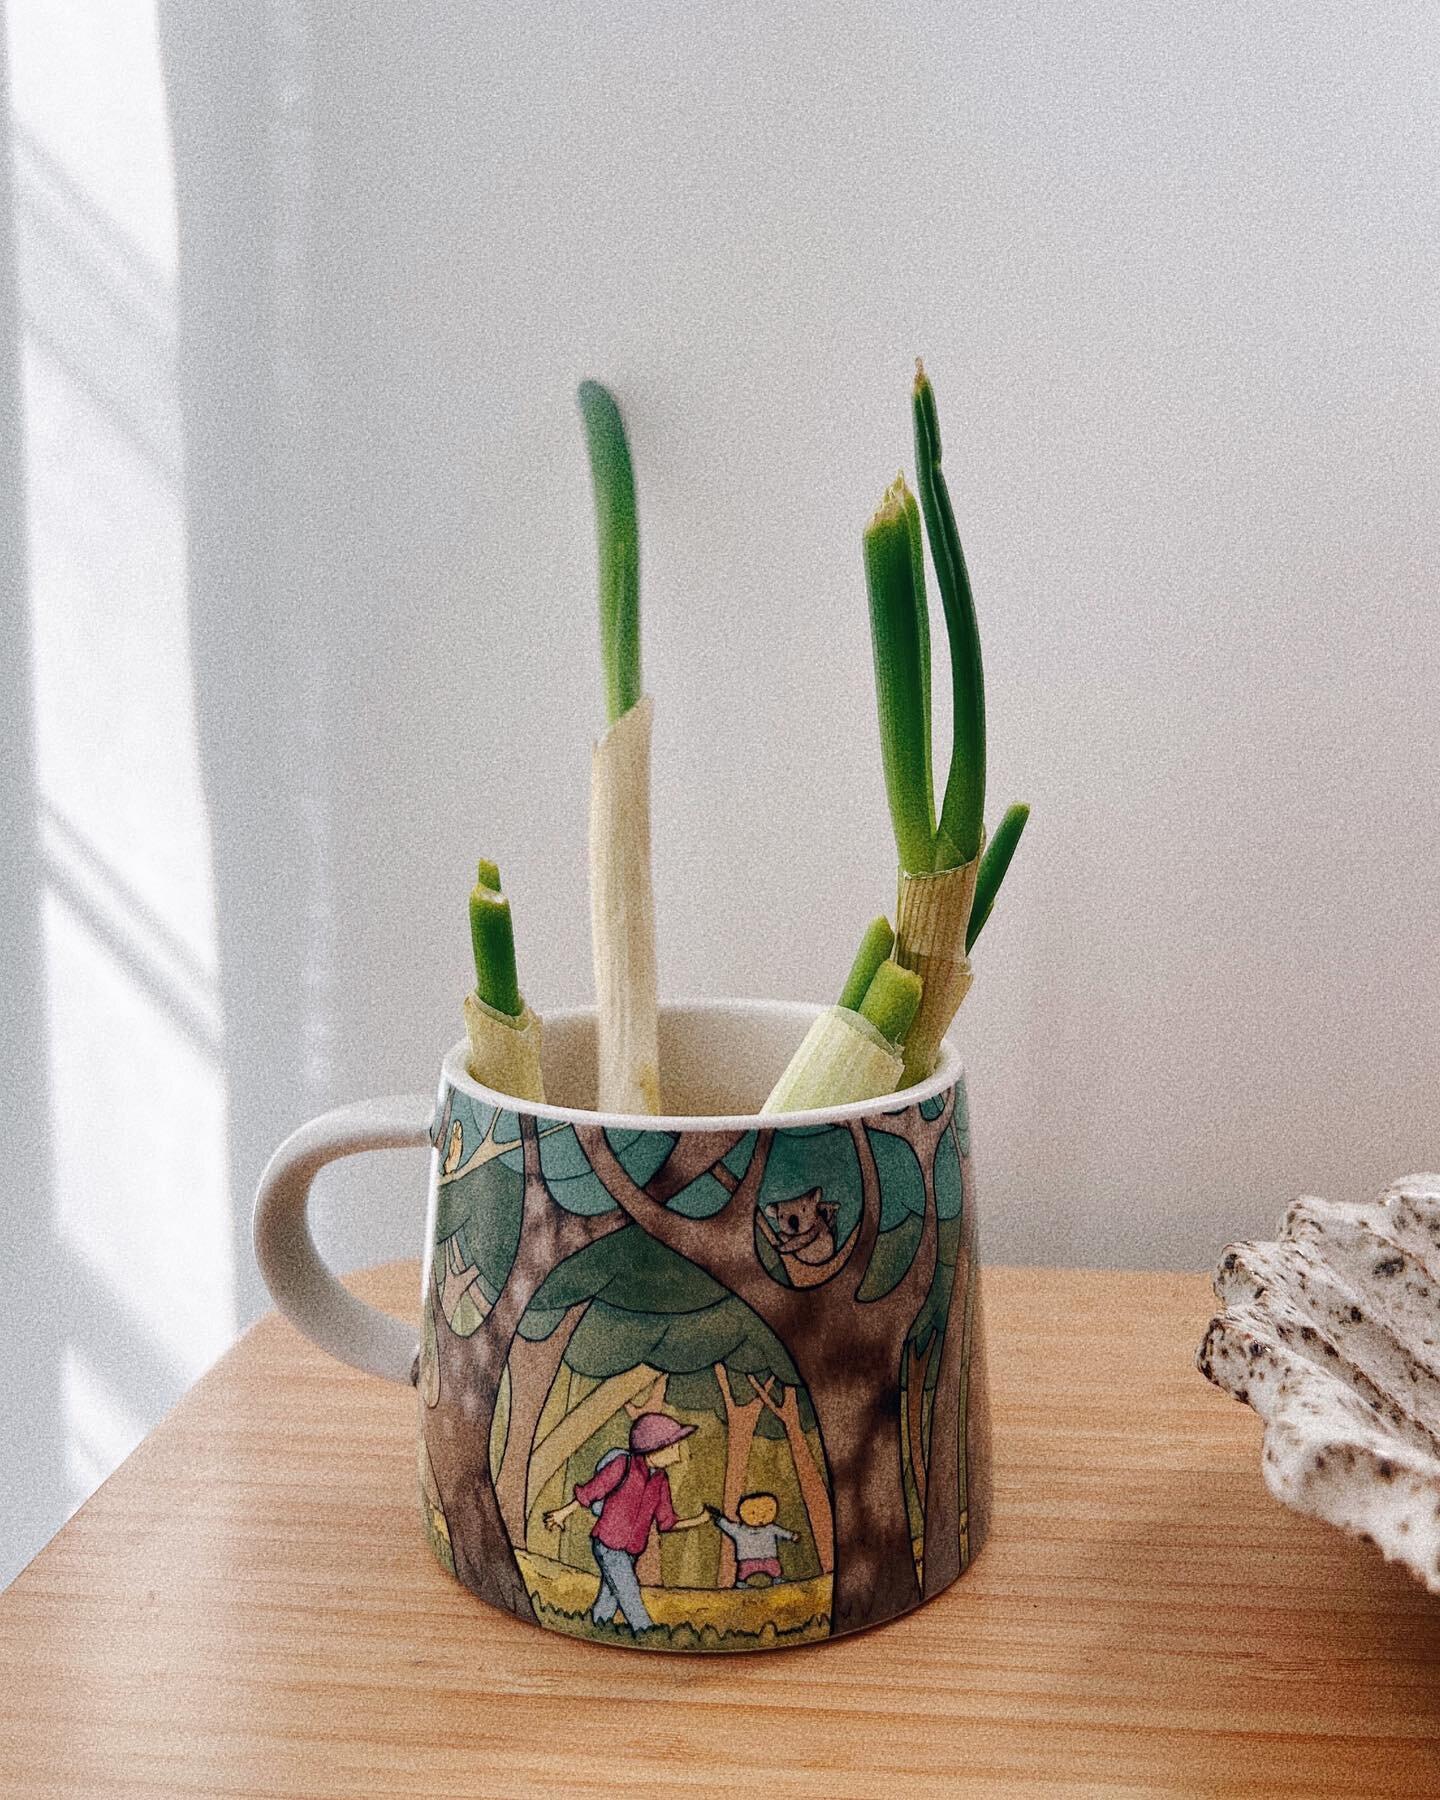 If you&rsquo;re not regrowing zombie spring onions, you&rsquo;re doing it wrong. 
〰️
Place roots in water or straight into soil and you&rsquo;ll never have to buy them again. You&rsquo;re welcome. 🌱